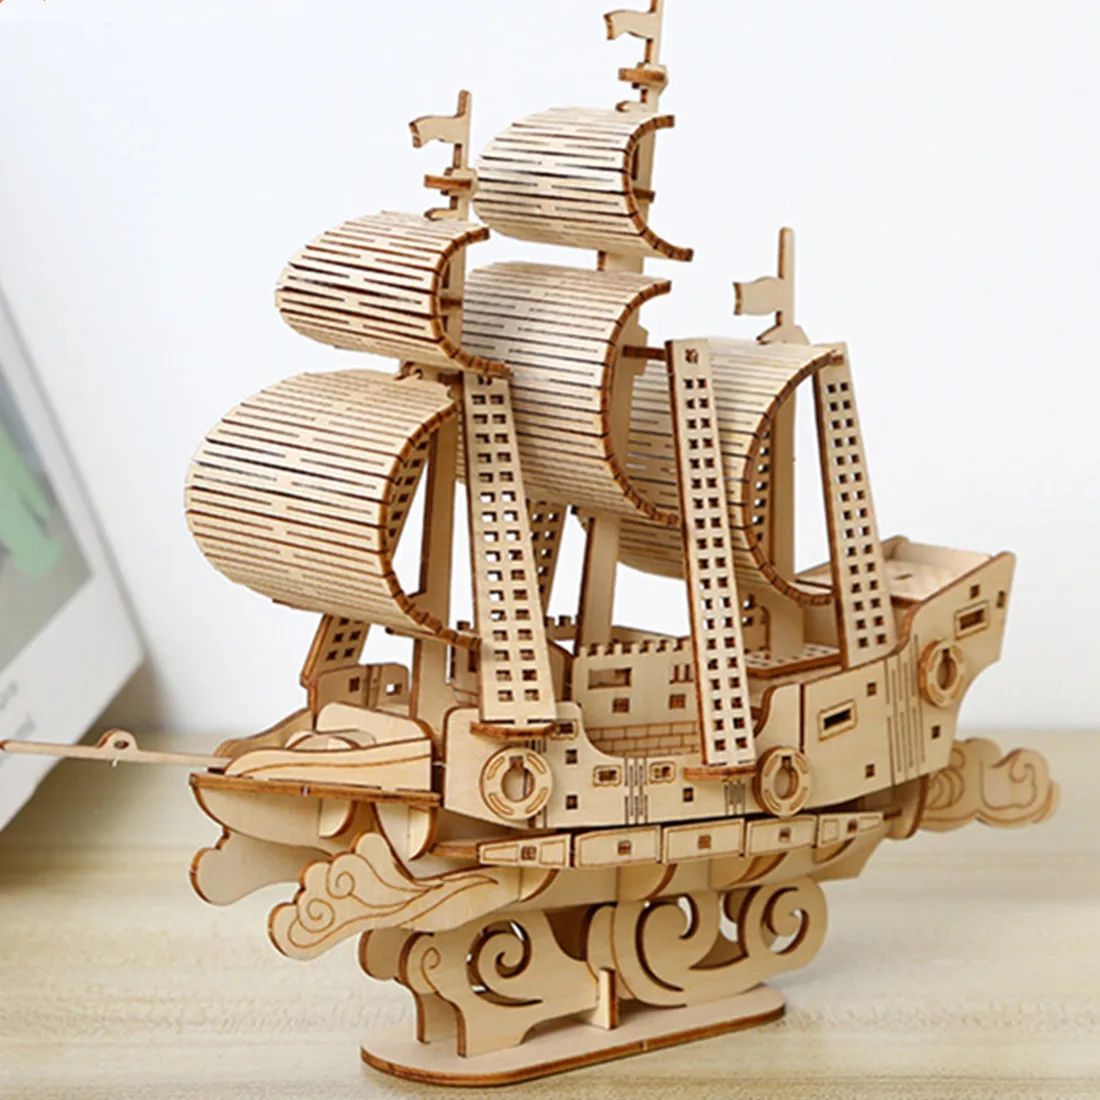 3D Puzzles Wooden Ocean Sailing Model Handmade Boat Building BlockS Kits DIY Assembly Ship Toy for Kids Adults GiftS